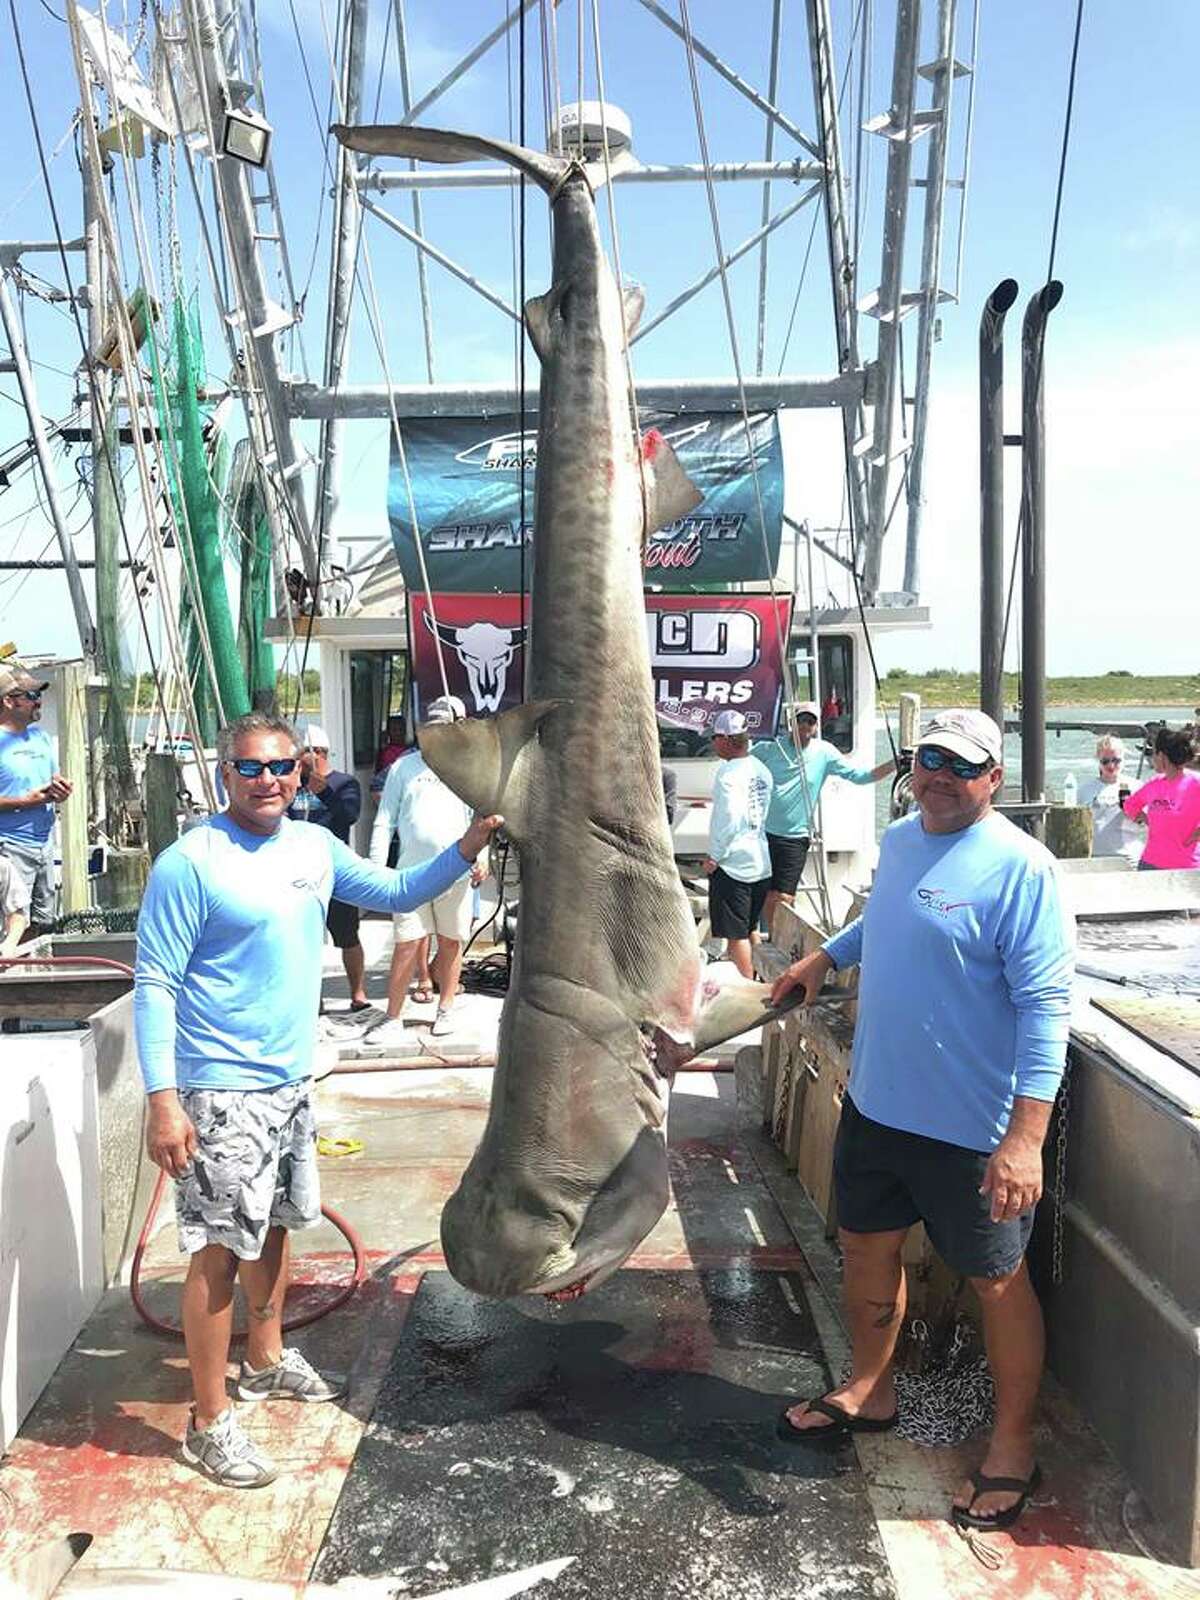 A team of anglers participating in a Port O'Connor fishing tournament reeled in a 12-foot tiger shark on Saturday, Aug. 4, 2018.